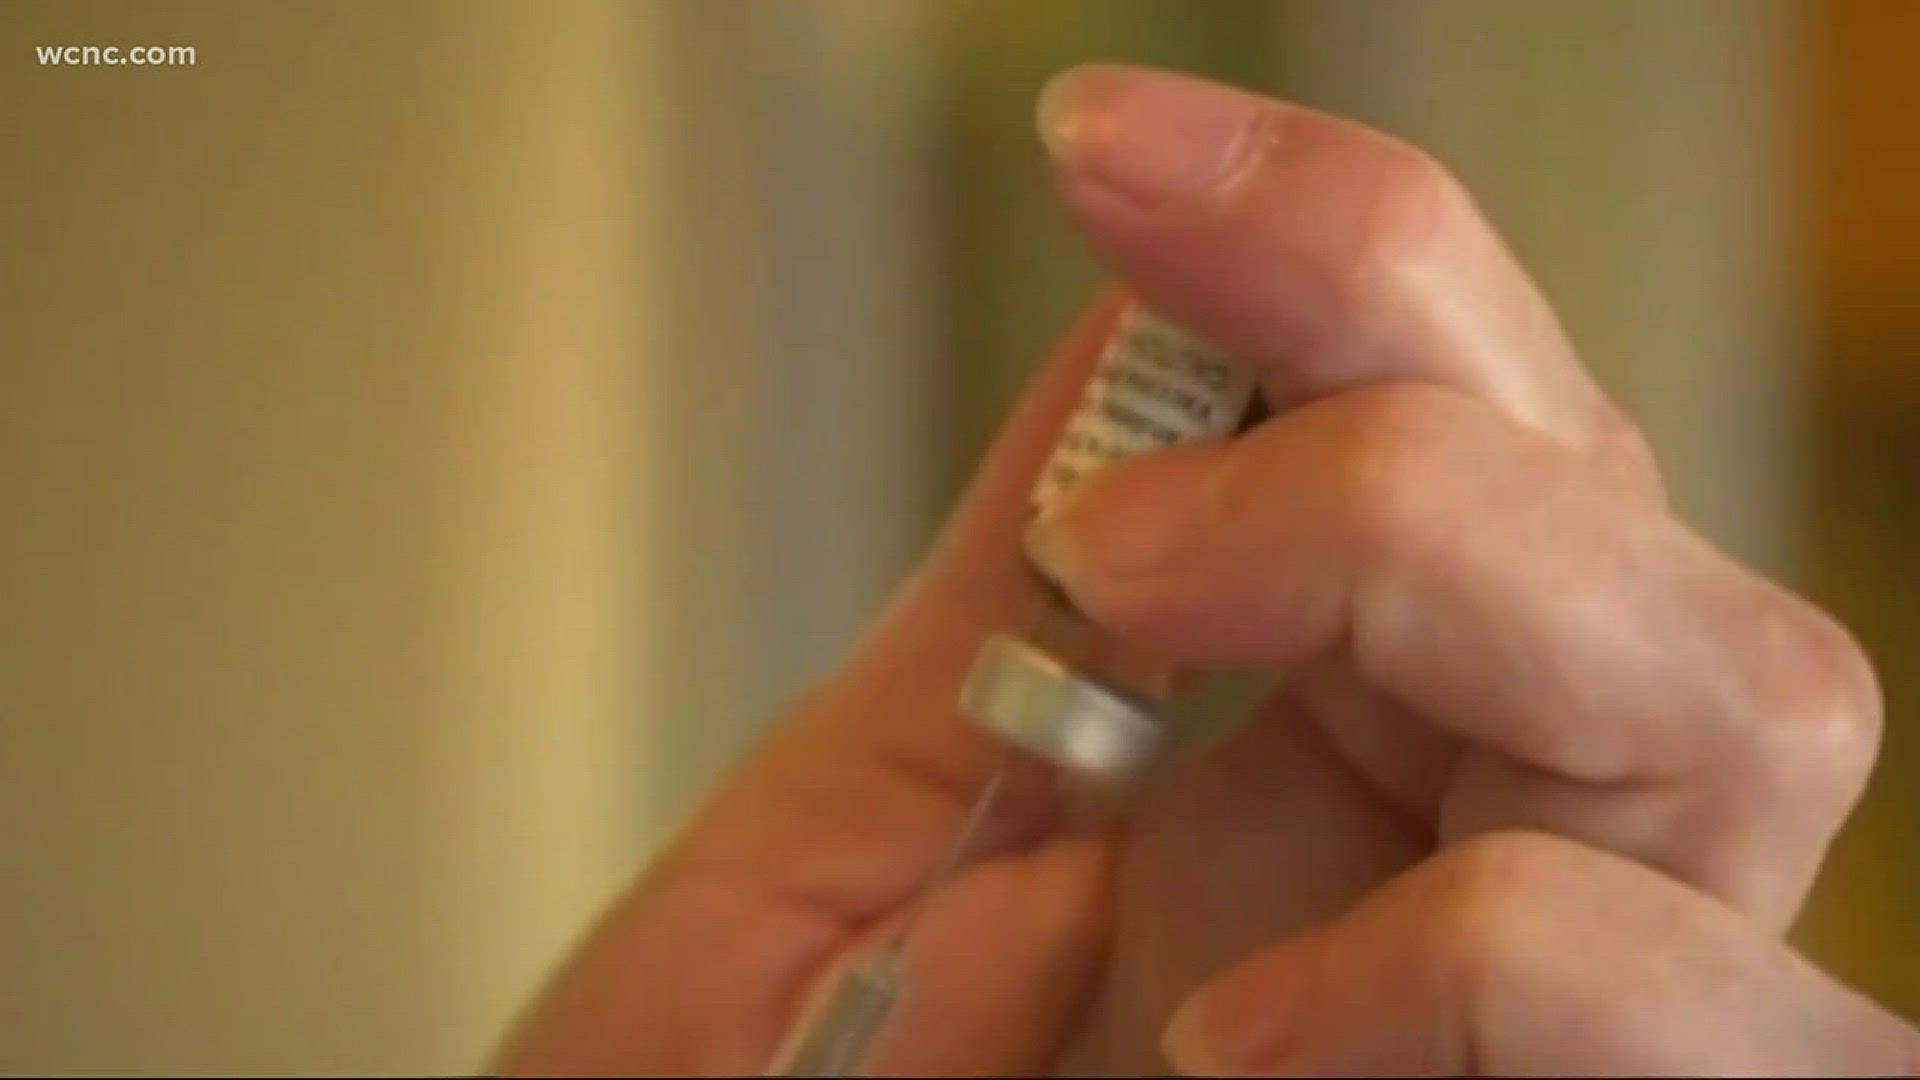 State health officials reported the first child flu death related to the flu of the season.